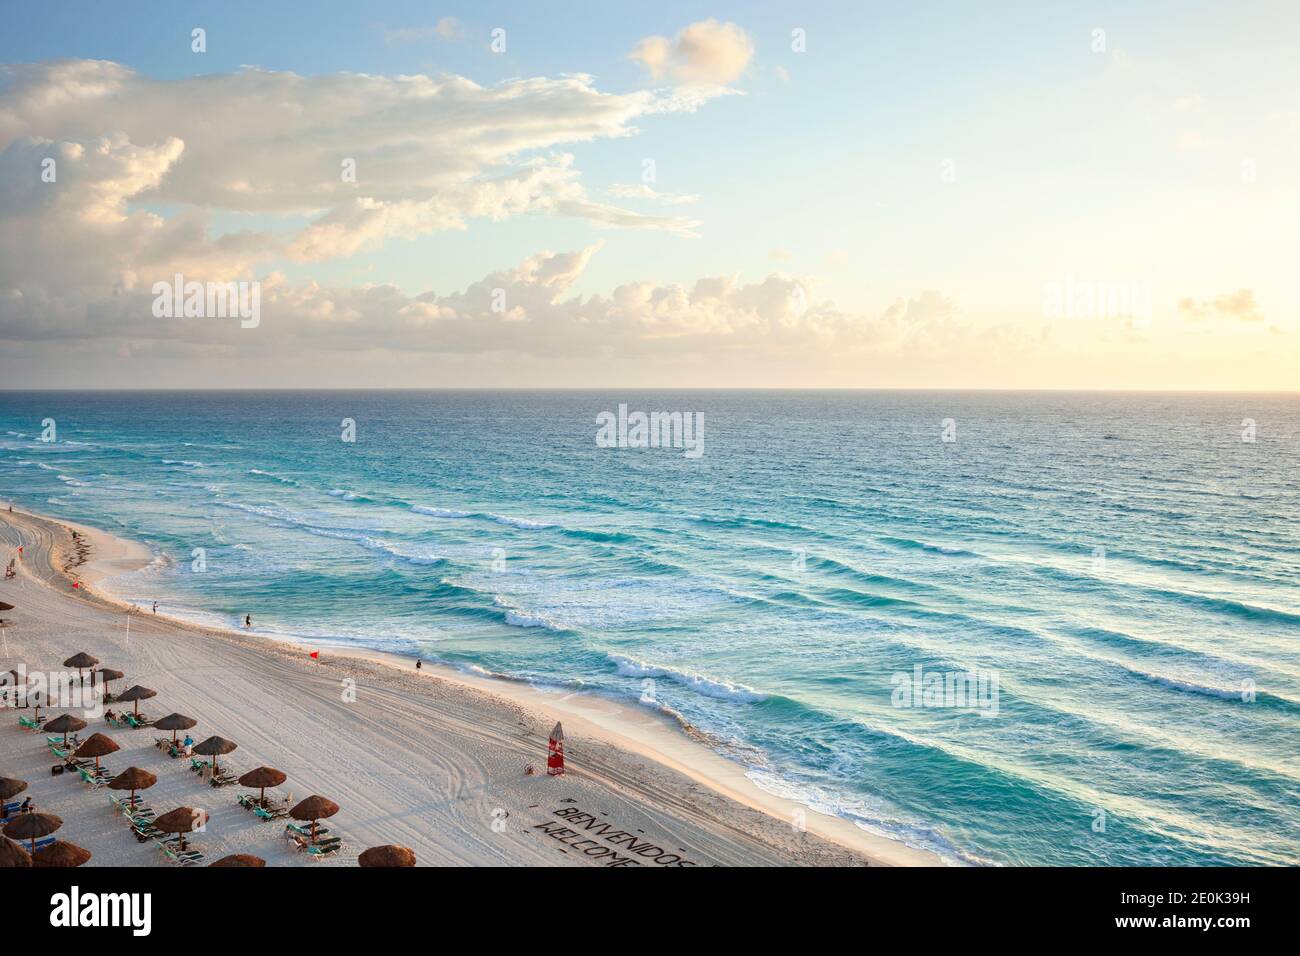 High angle view of the beach in Cancun, Mexico at dawn Stock Photo